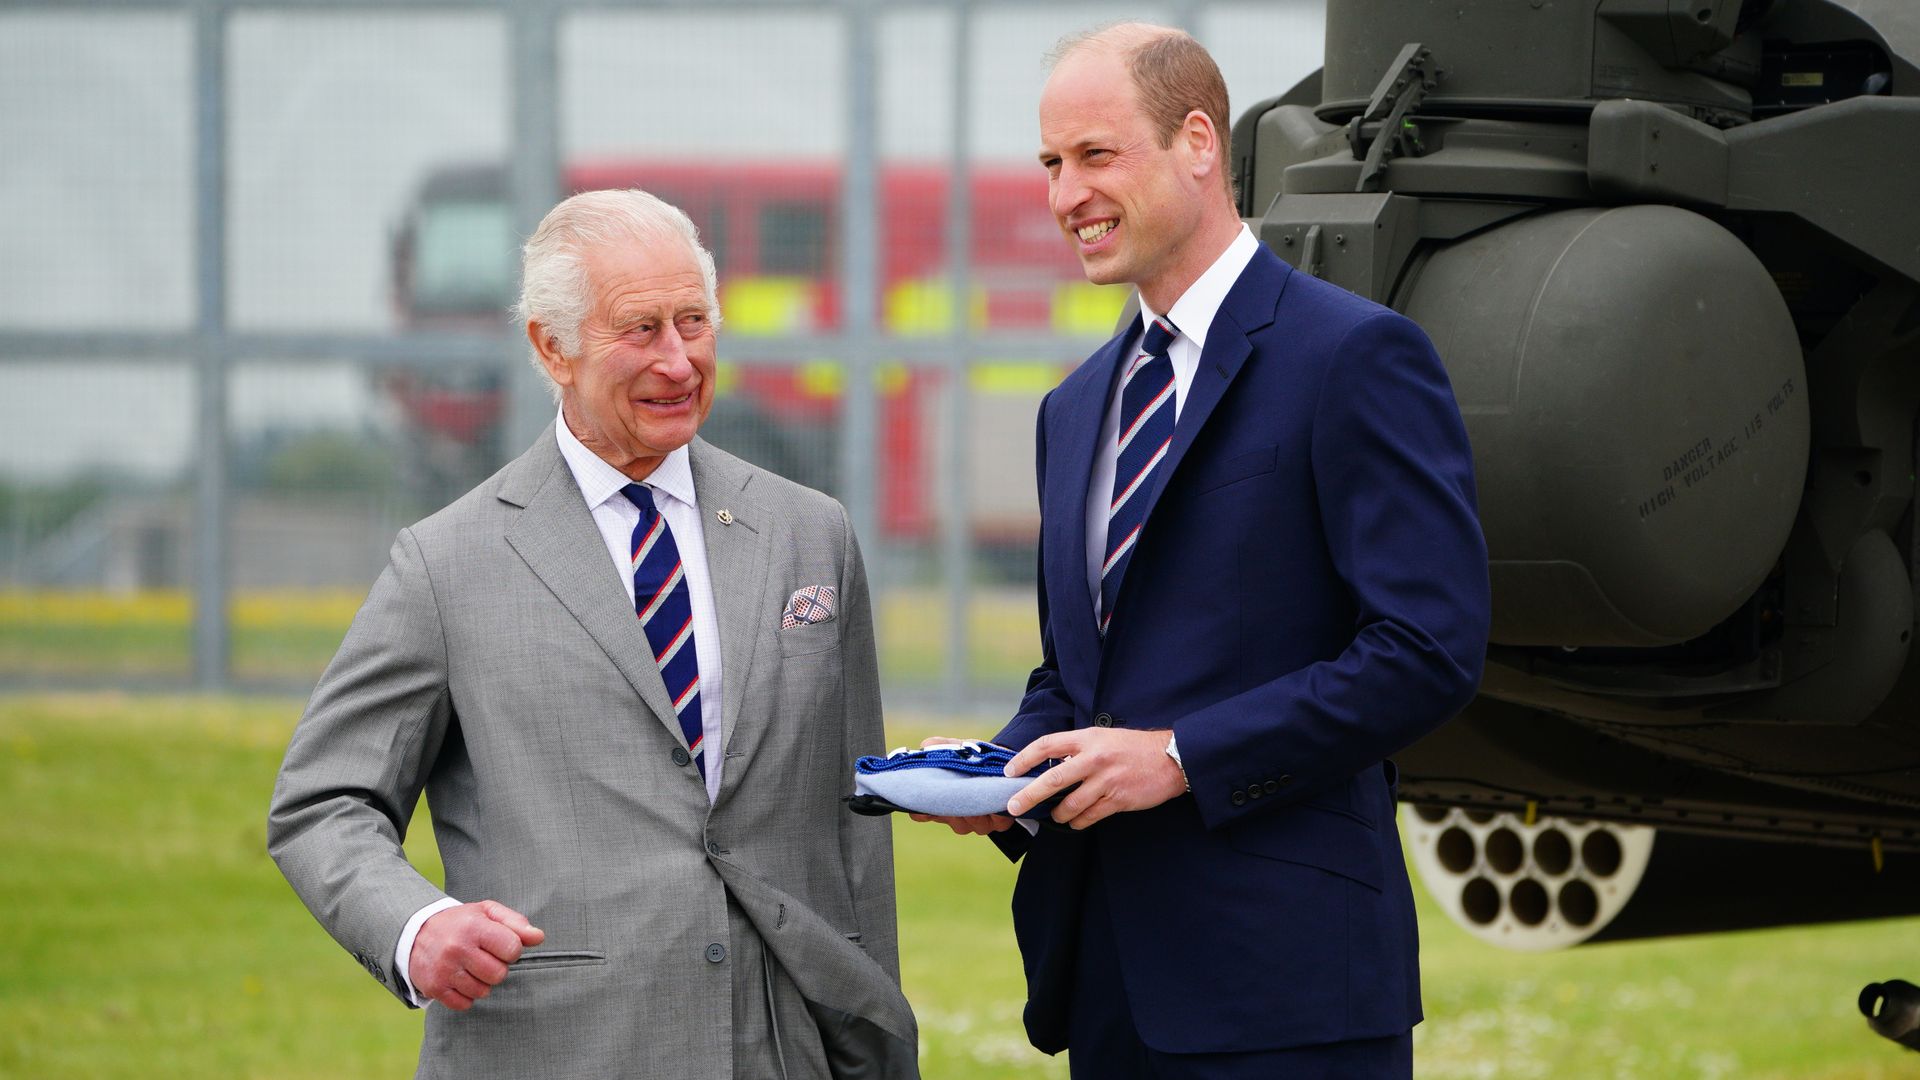 King hands over senior military role to Prince William - and discusses cancer treatment side effects